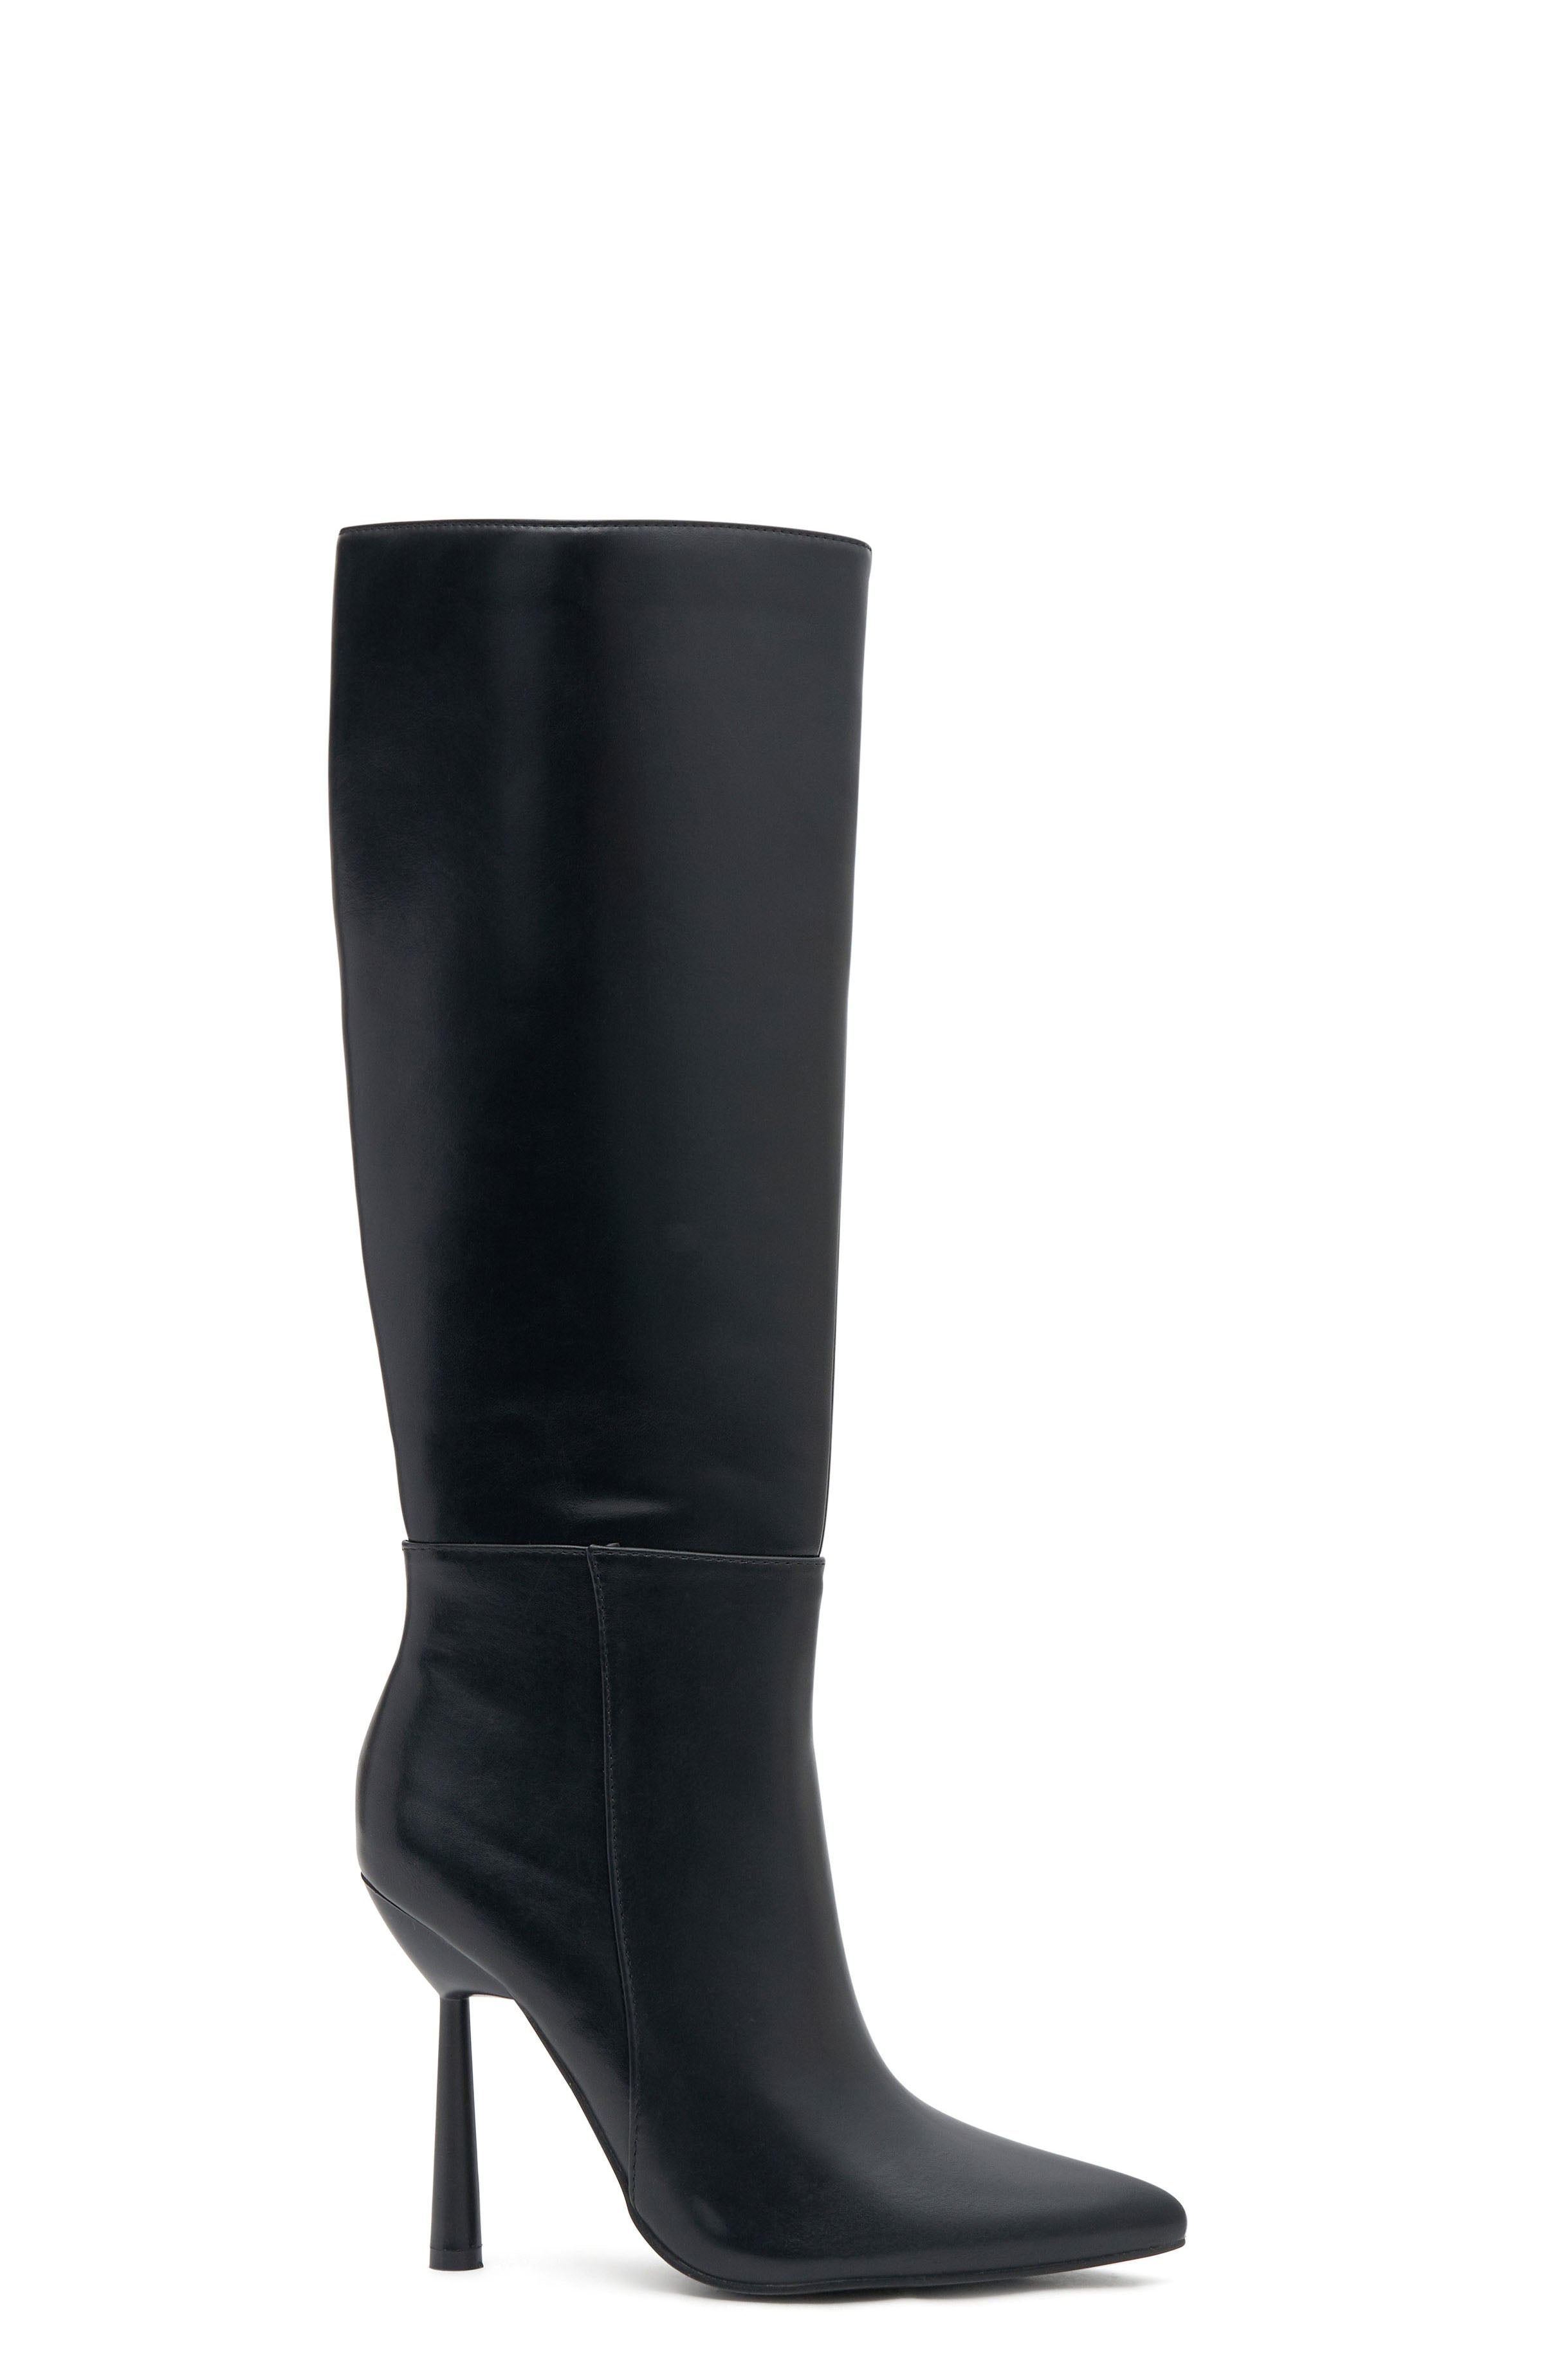 Amelia Knee High Boots Black Smooth | White Fox Boutique US